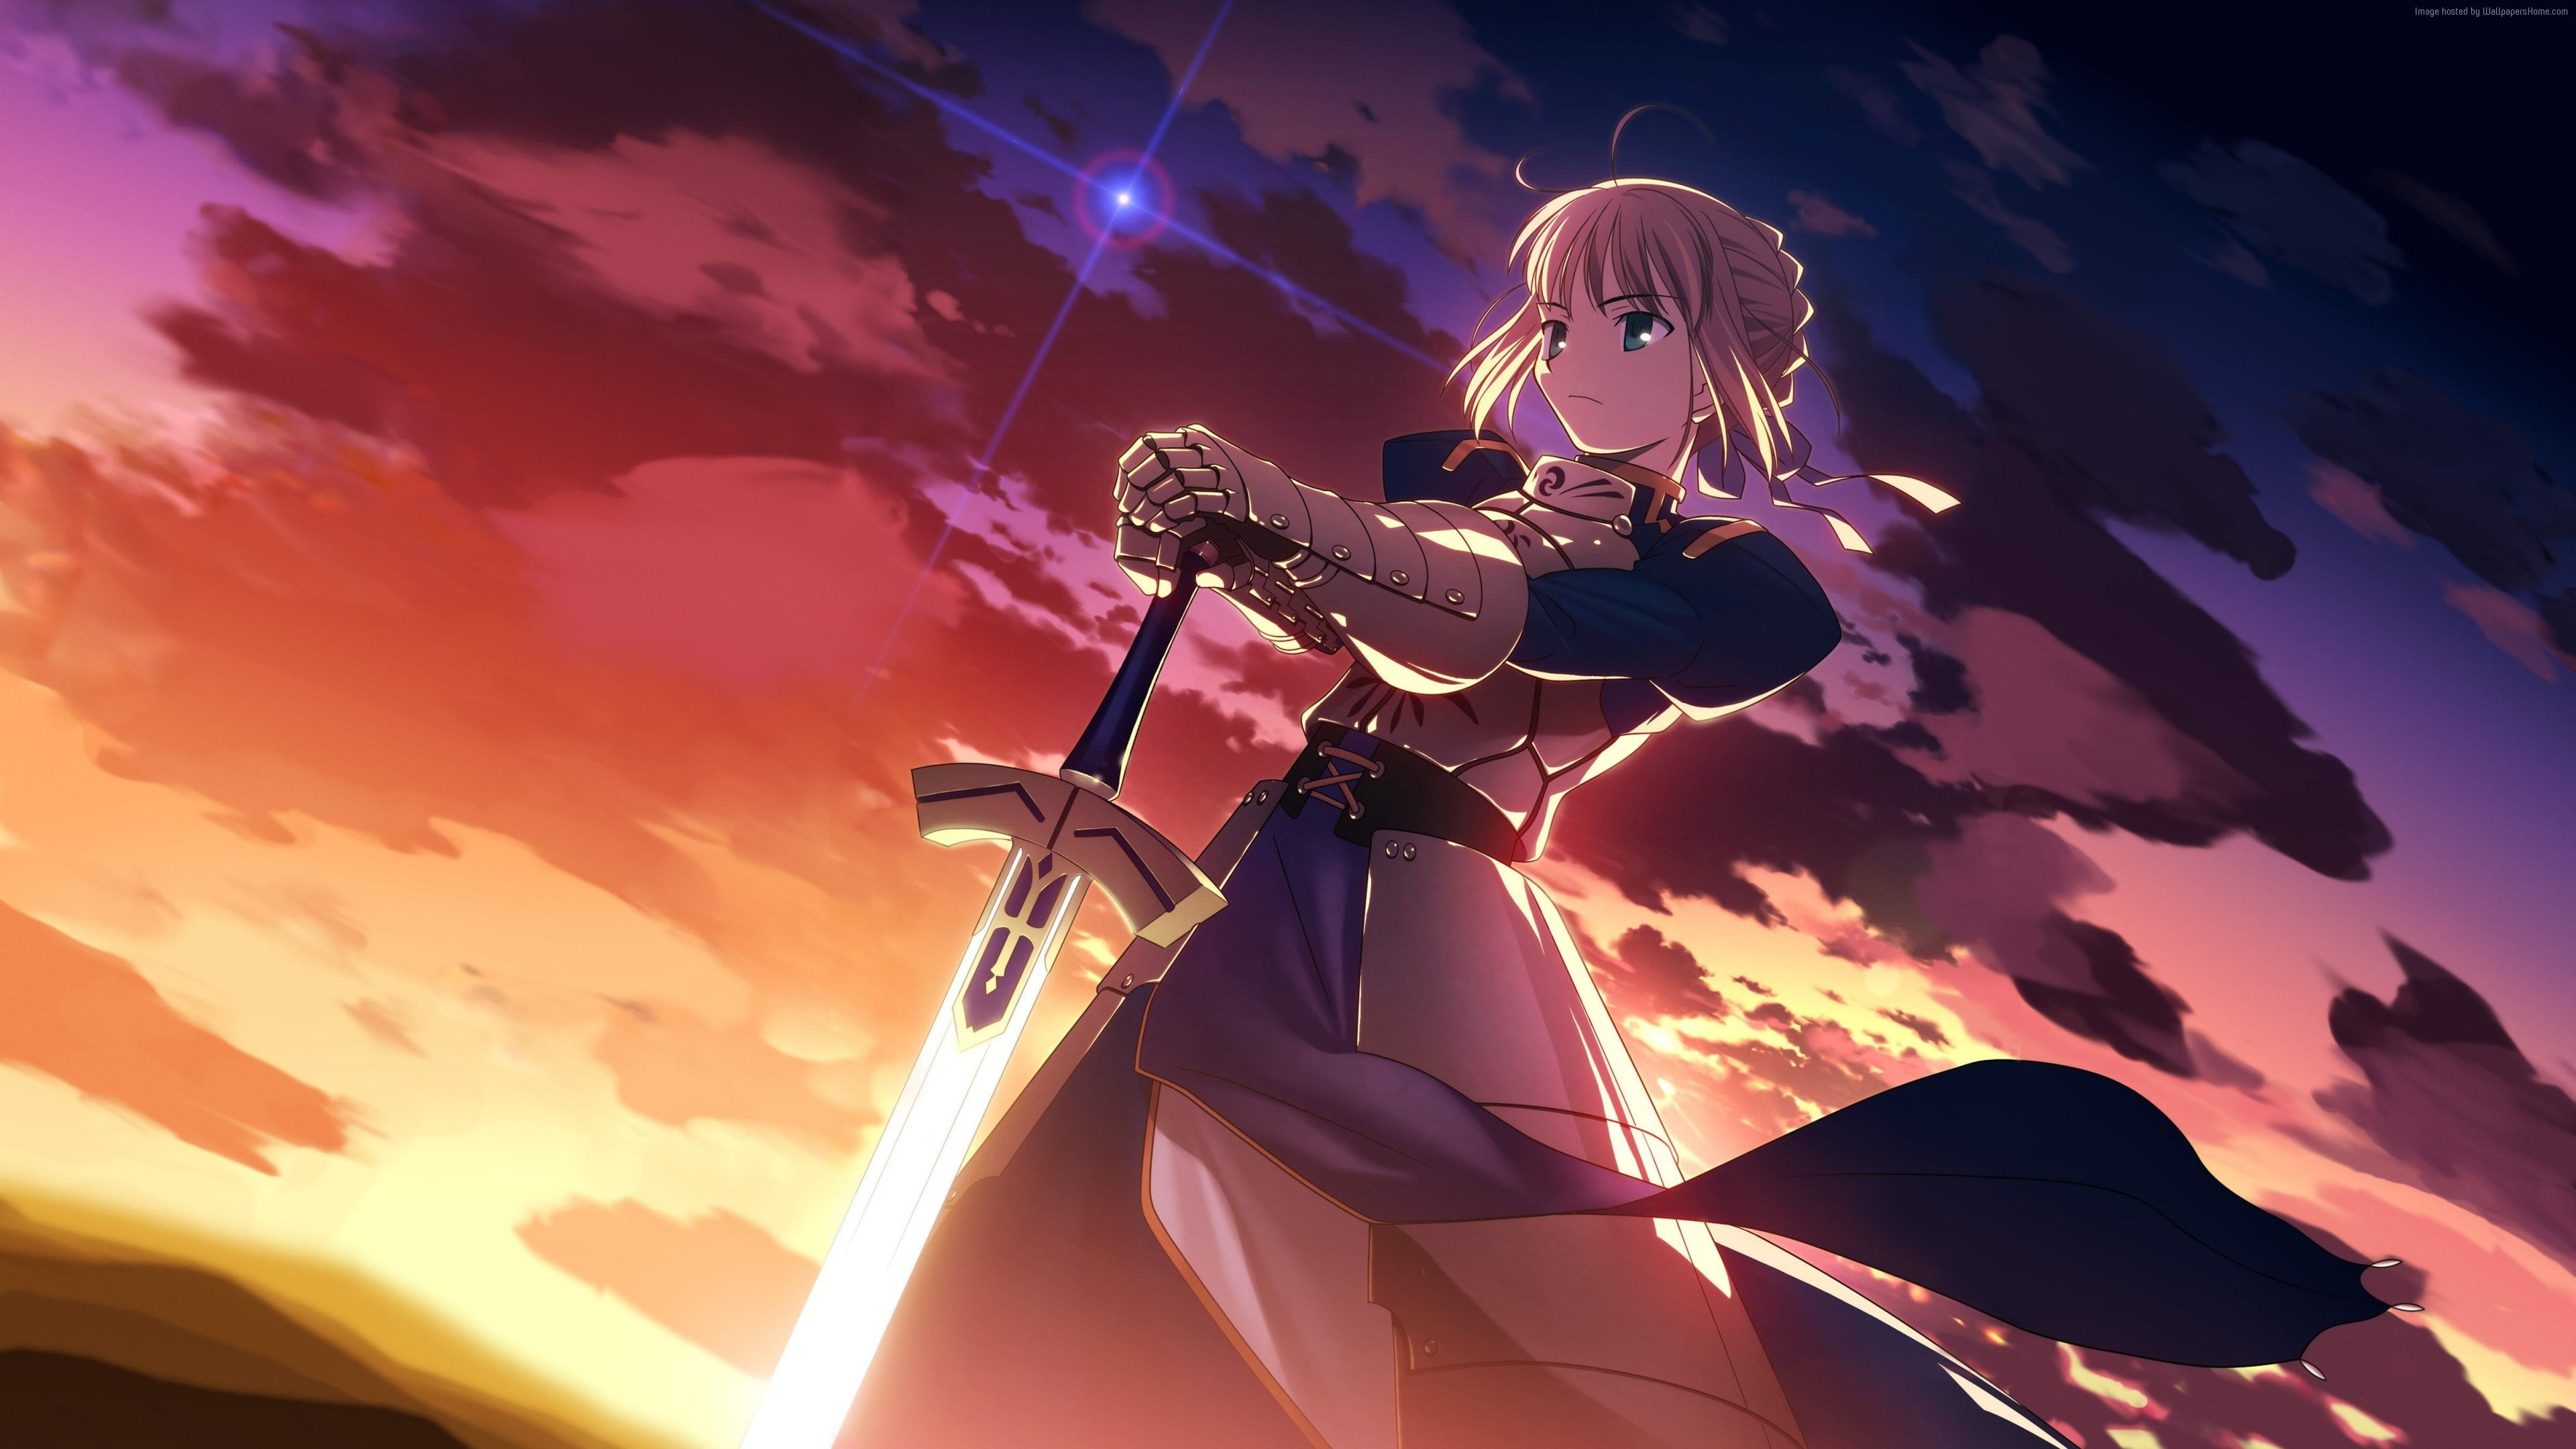 Anime Fate Stay Night 4k HD Anime 4k Wallpapers Images Backgrounds  Photos and Pictures